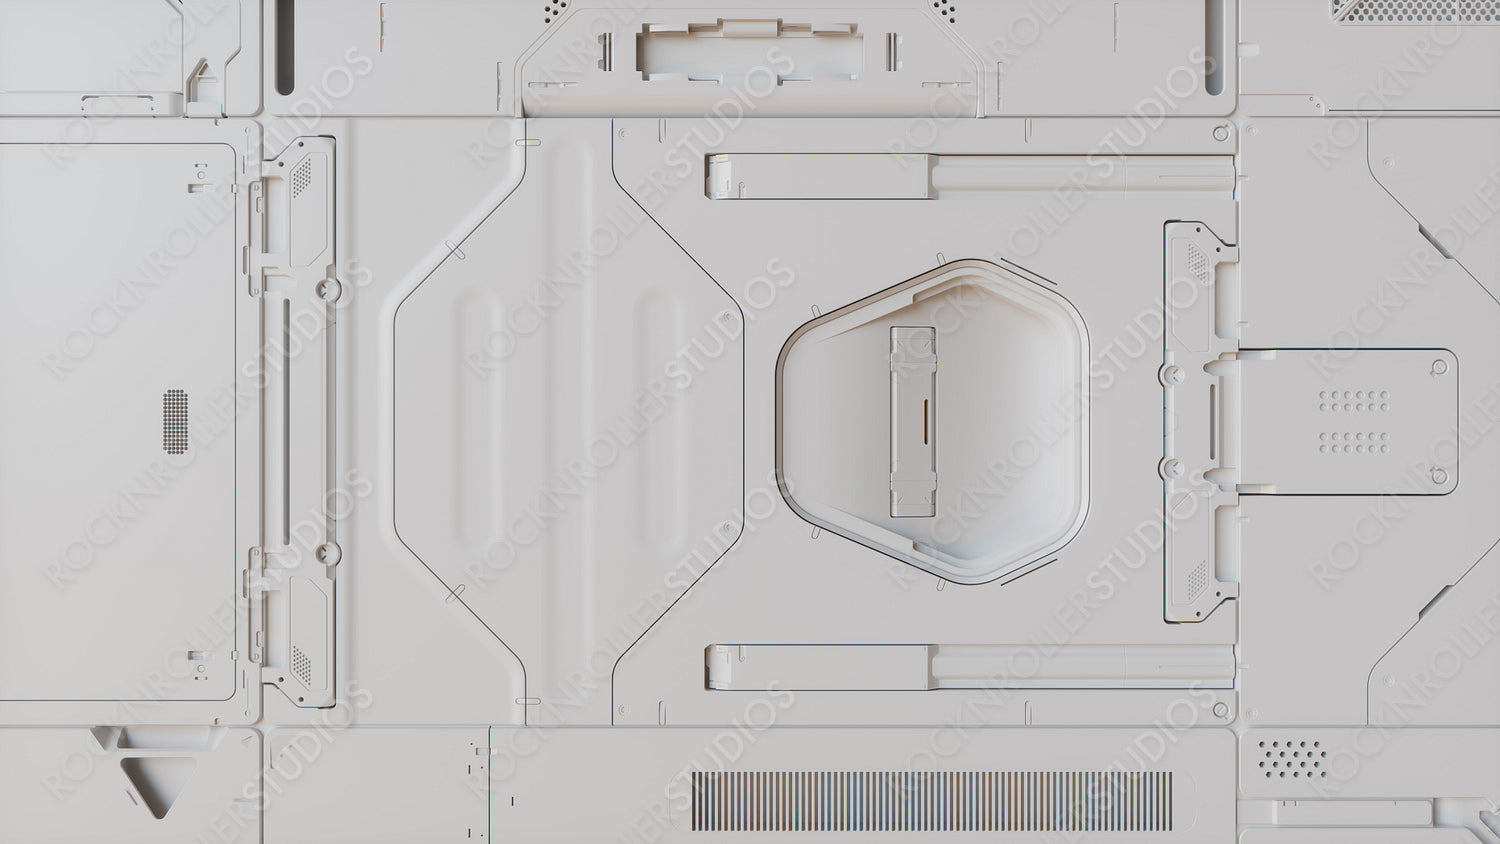 Technology Wallpaper with Innovative, White Science Fiction Hardware. 3D Render.